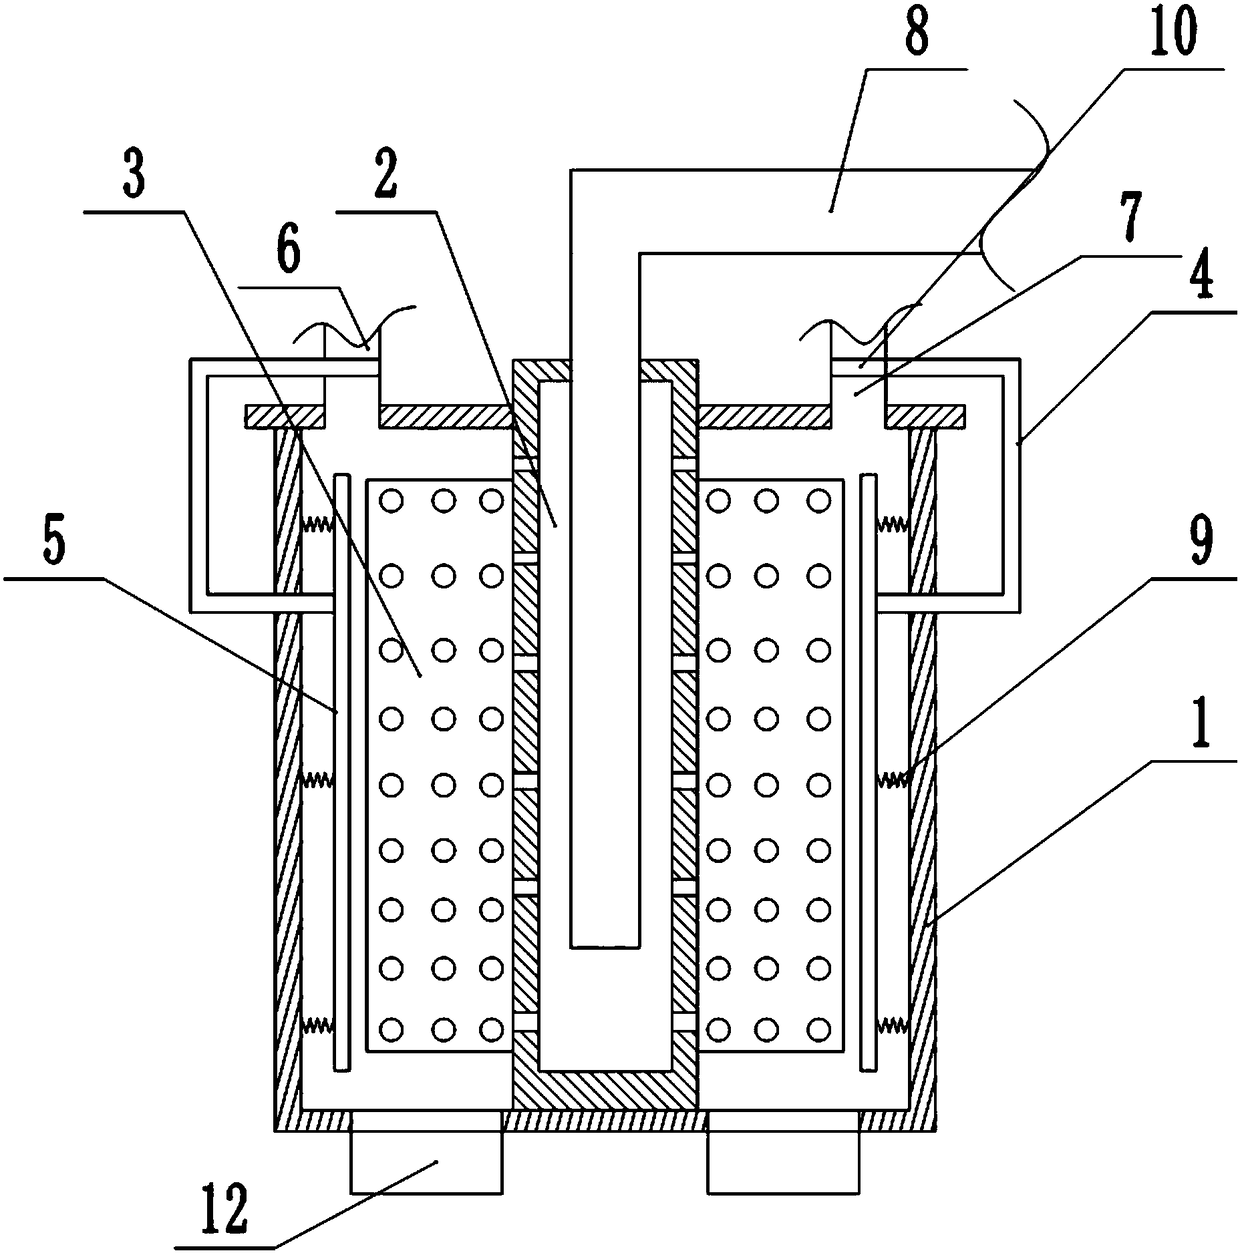 Sewage treatment and recycling device